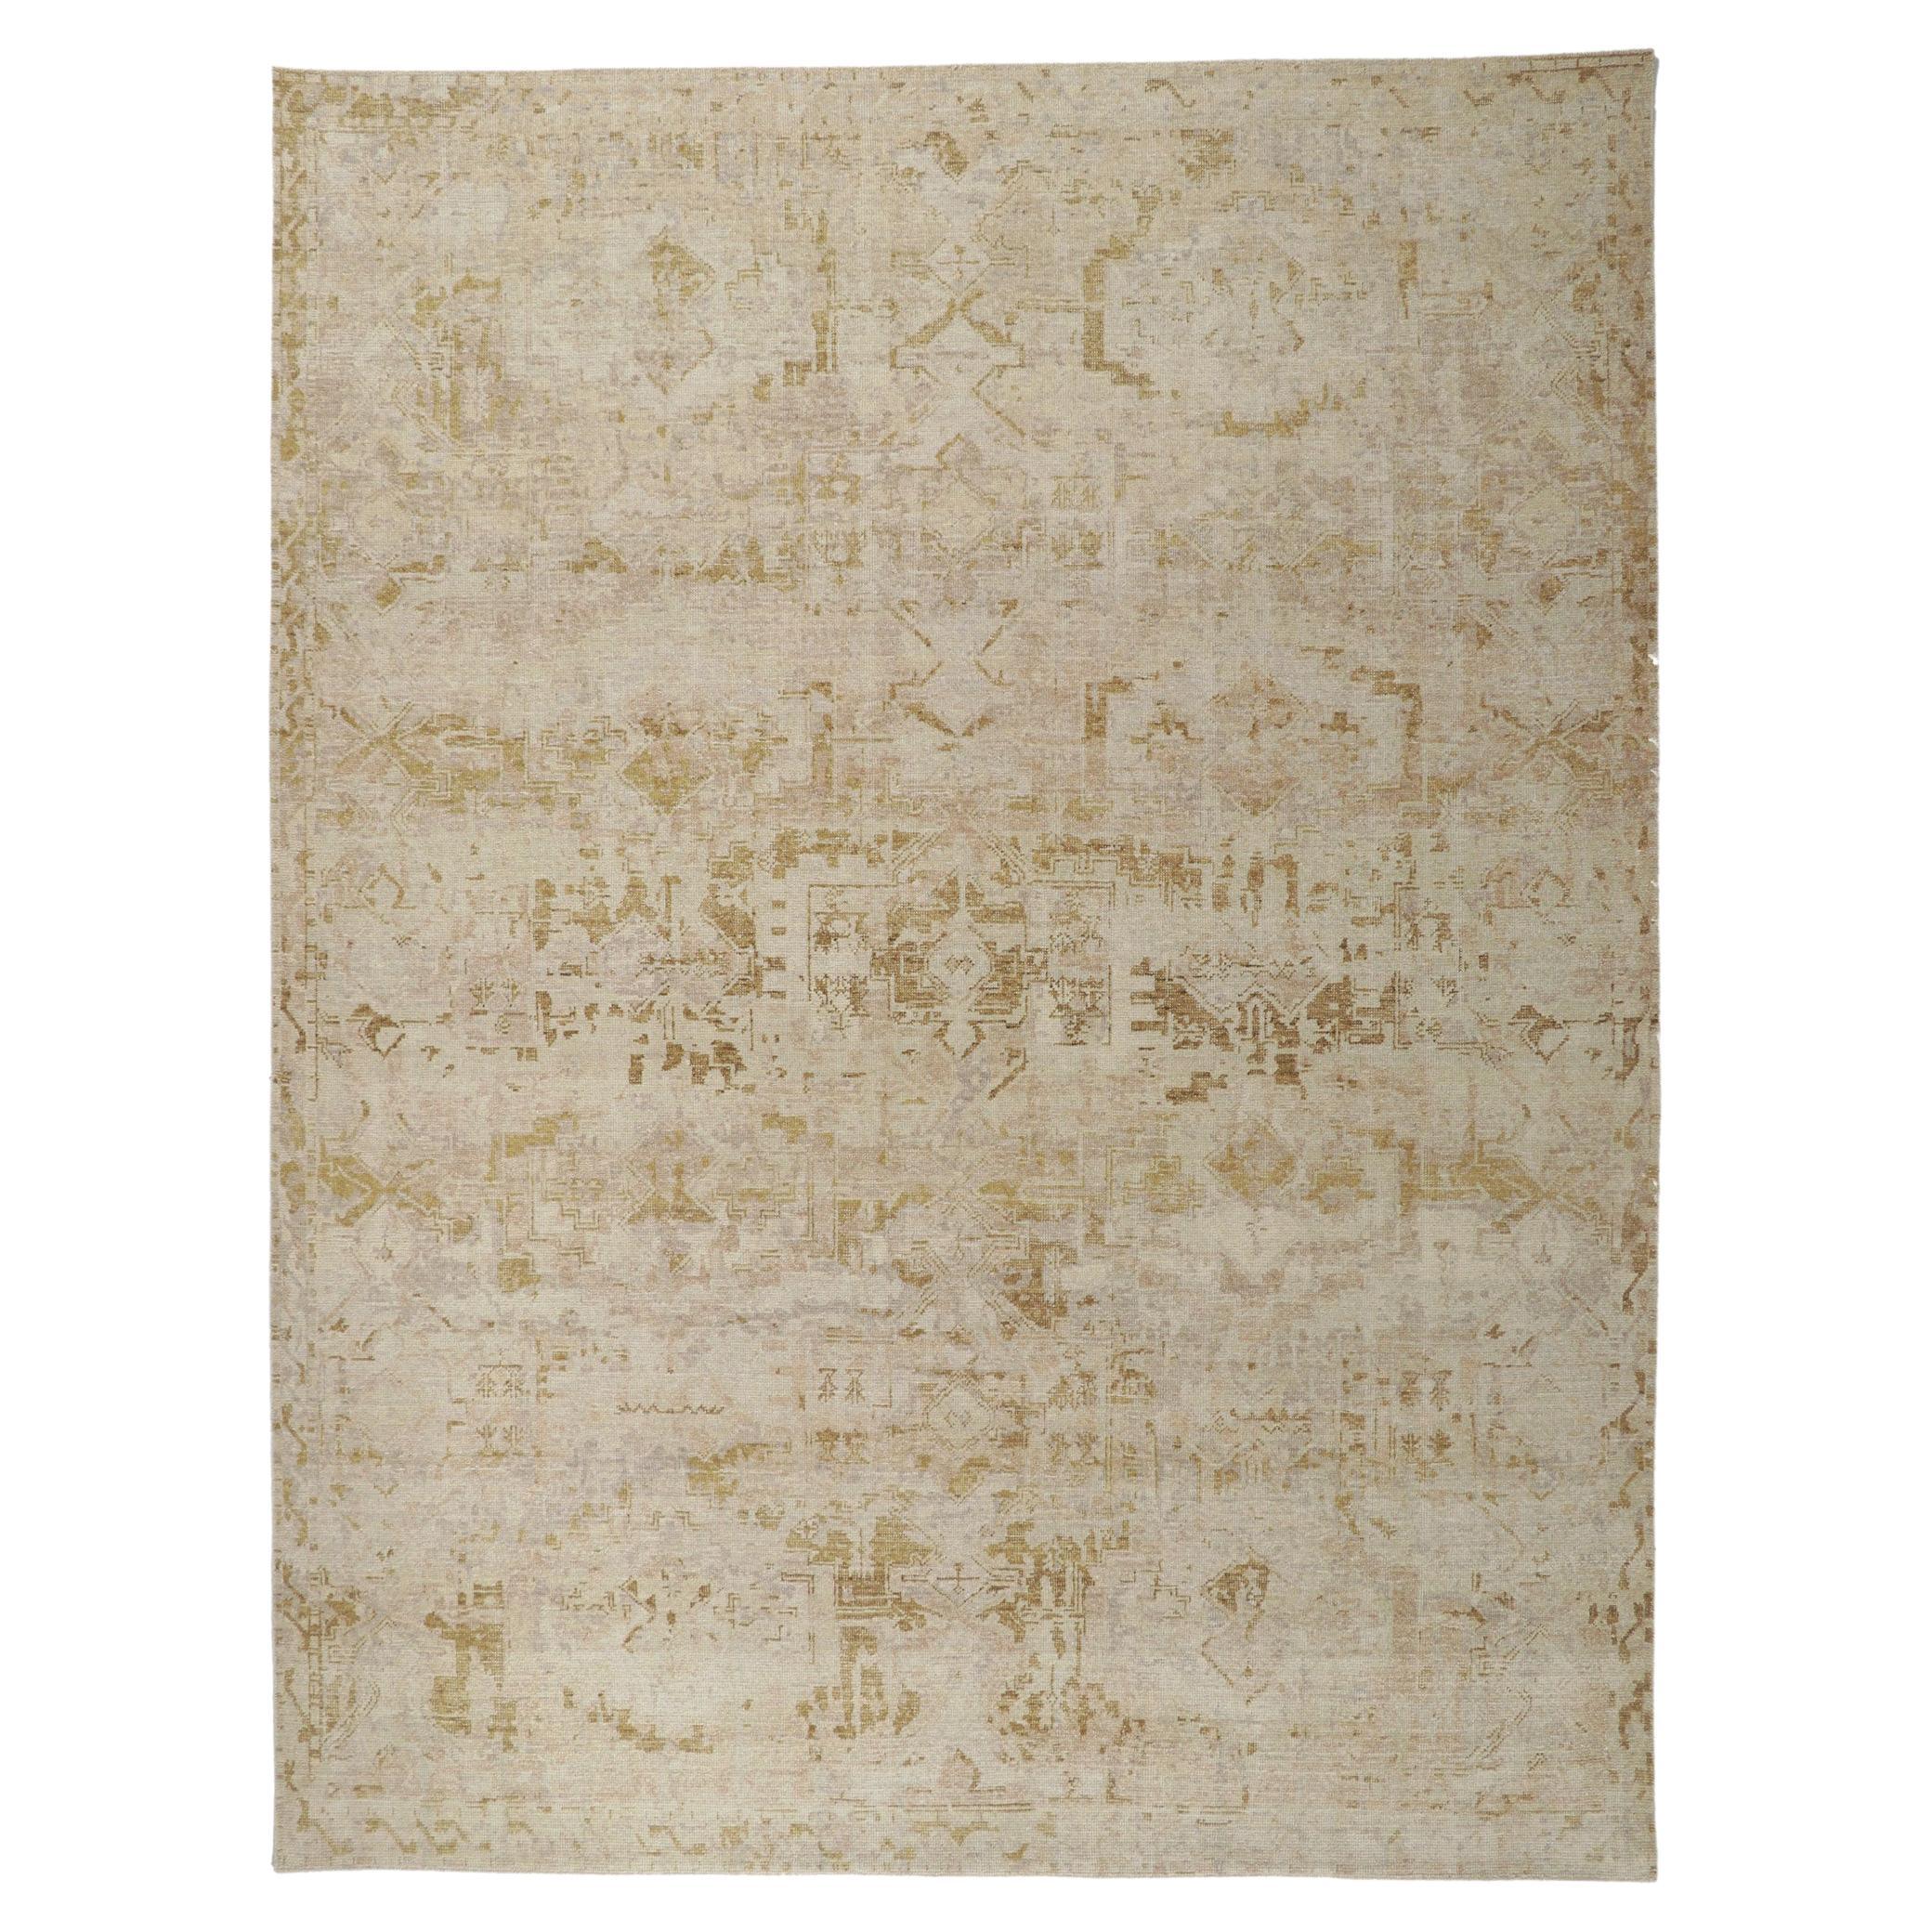 New Vintage-Style Distressed Rug with Neutral Earth-Tone Colors For Sale